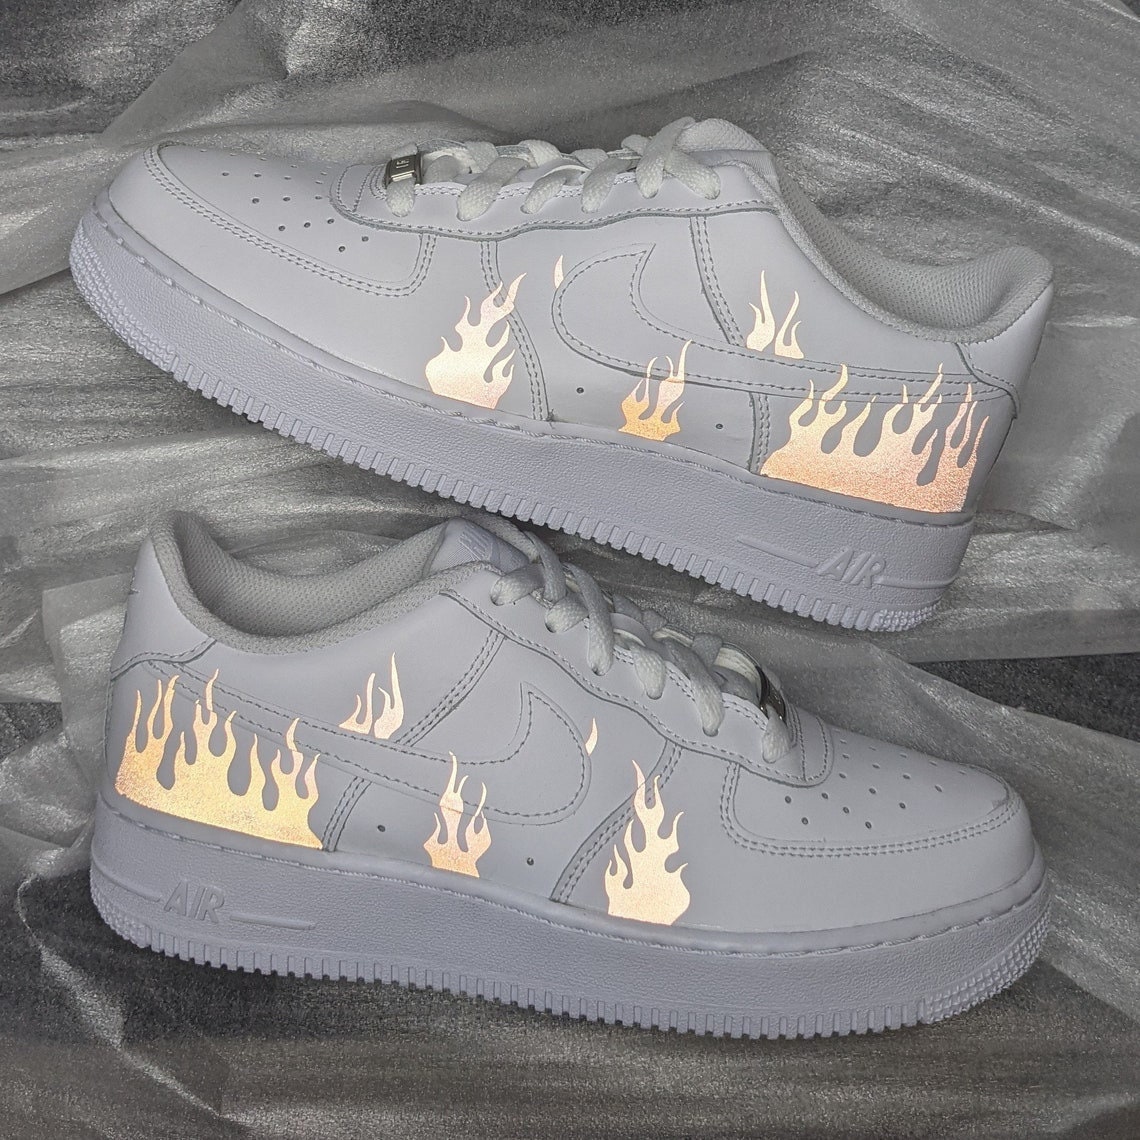 Mareo Implacable Seguro Nike AF1 Air Force 1 Custom Reflective Flames All Sizes - Etsy Canada